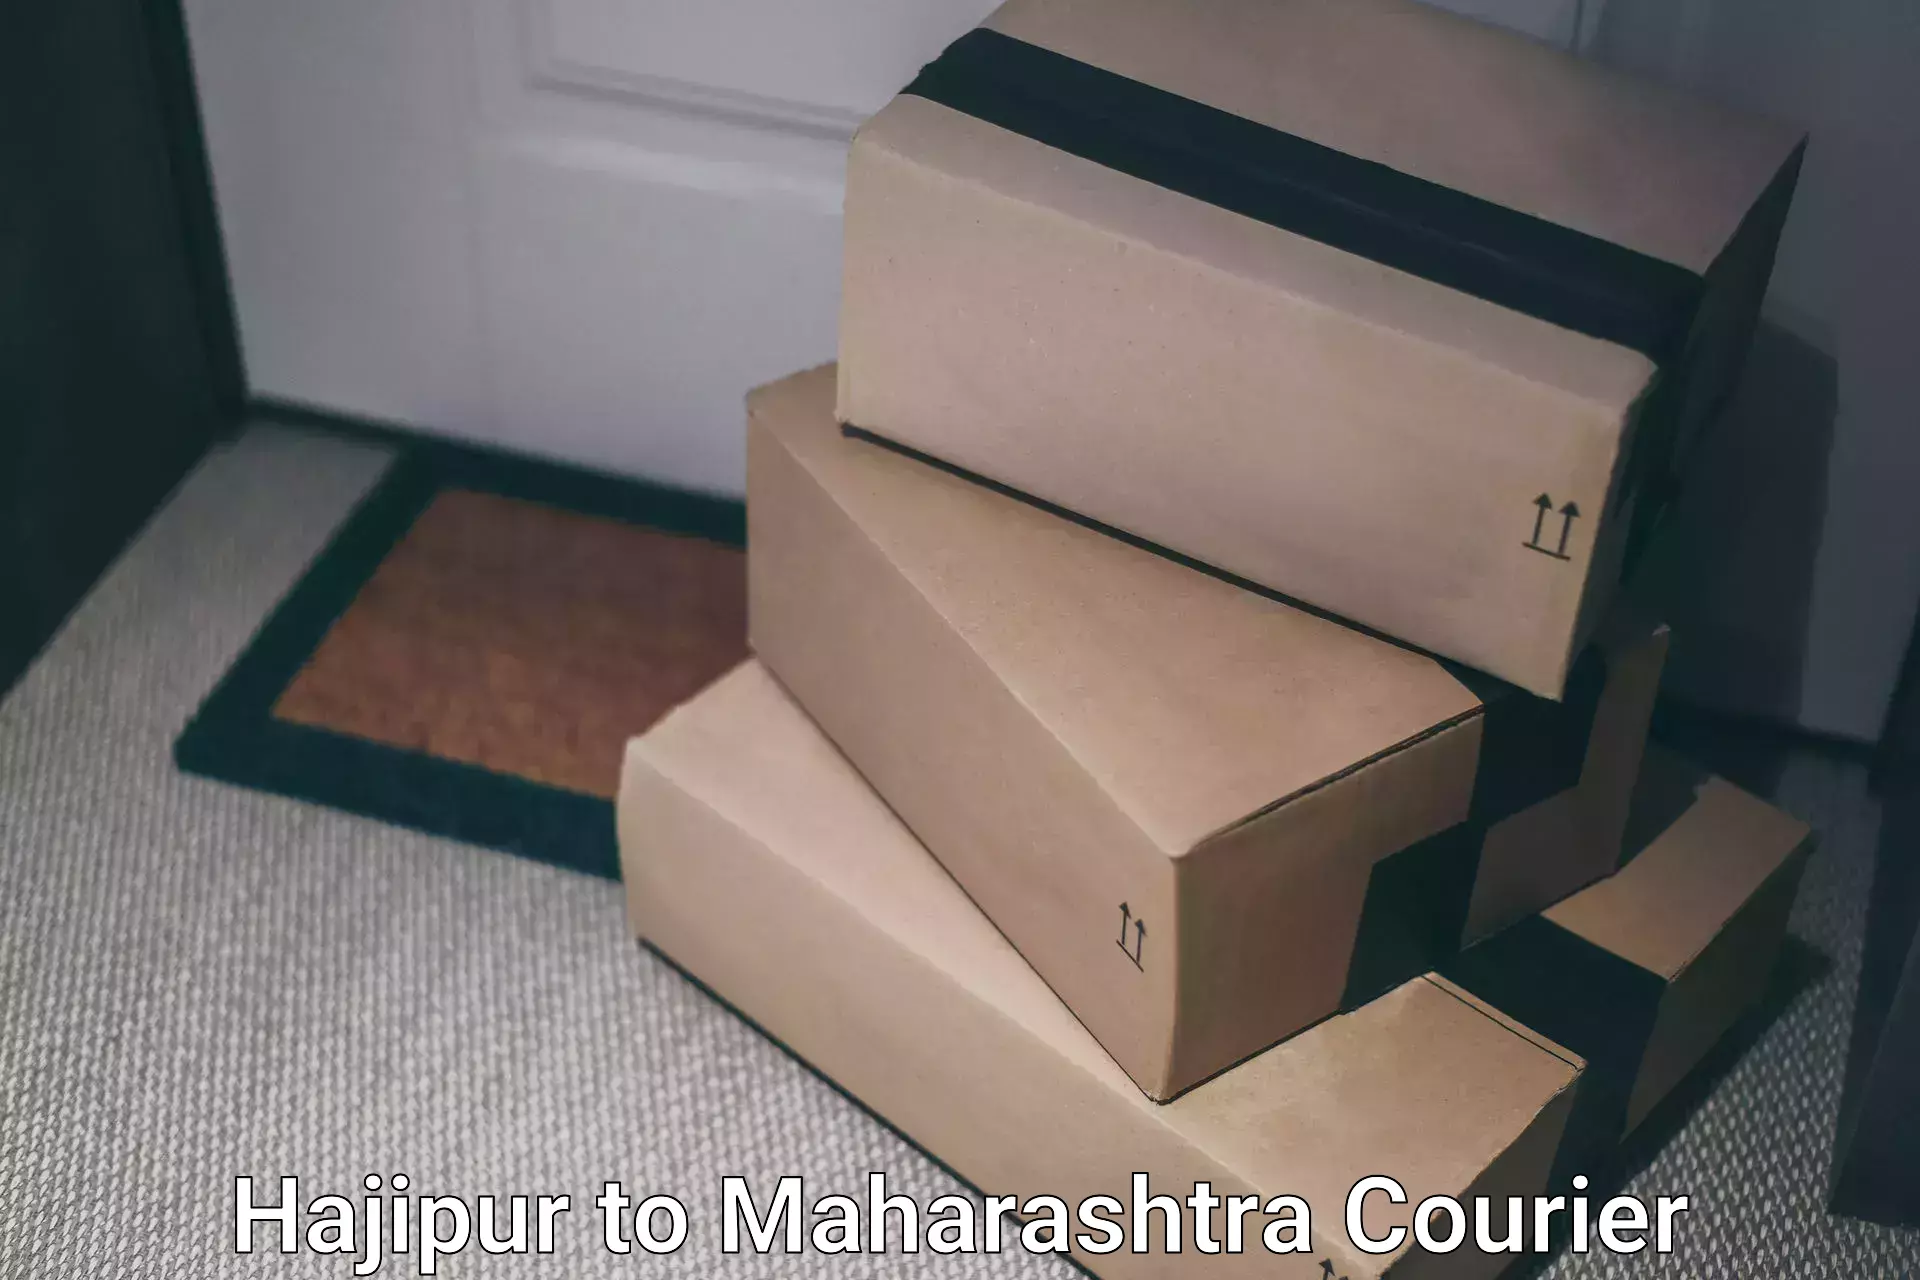 Courier service efficiency Hajipur to Chinchbunder